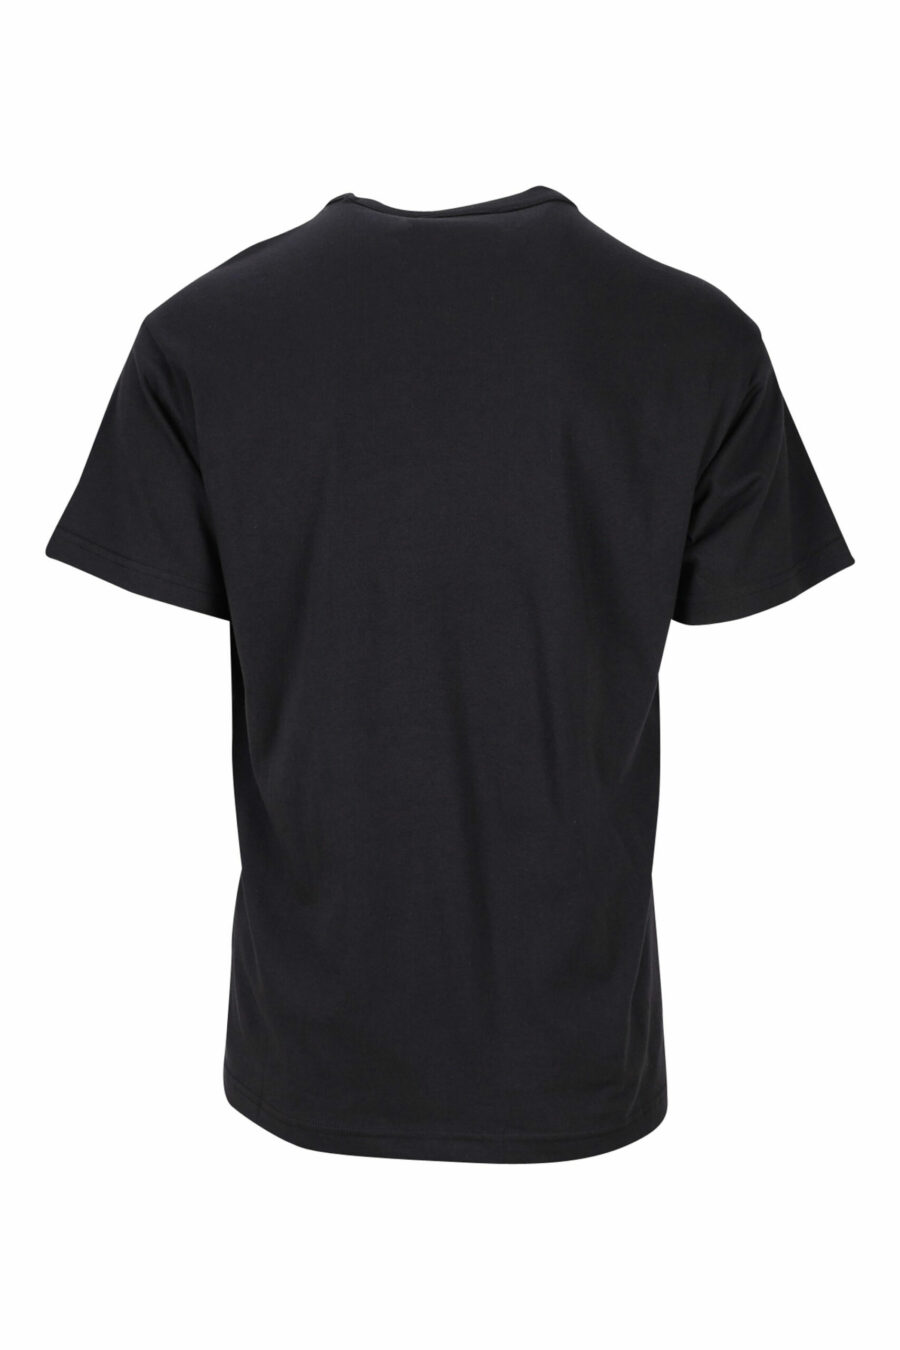 Black T-shirt with monochrome "piece number" maxilogo - 8052019468755 1 scaled